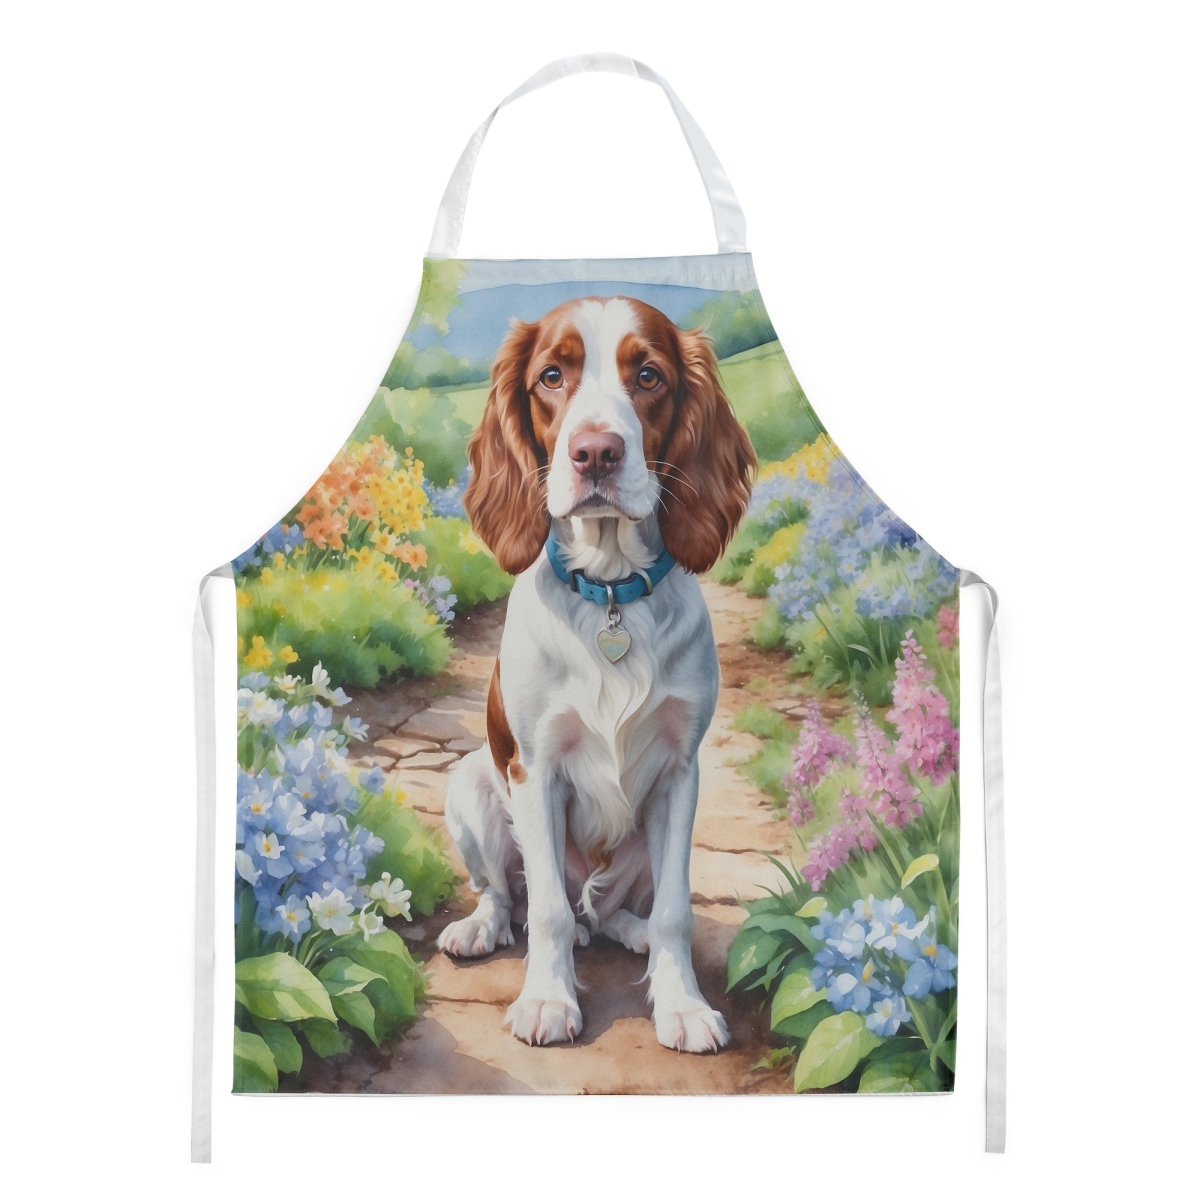 Picture of Carolines Treasures DAC6729APRON 30 x 27 in. Welsh Springer Spaniel Spring Path Apron